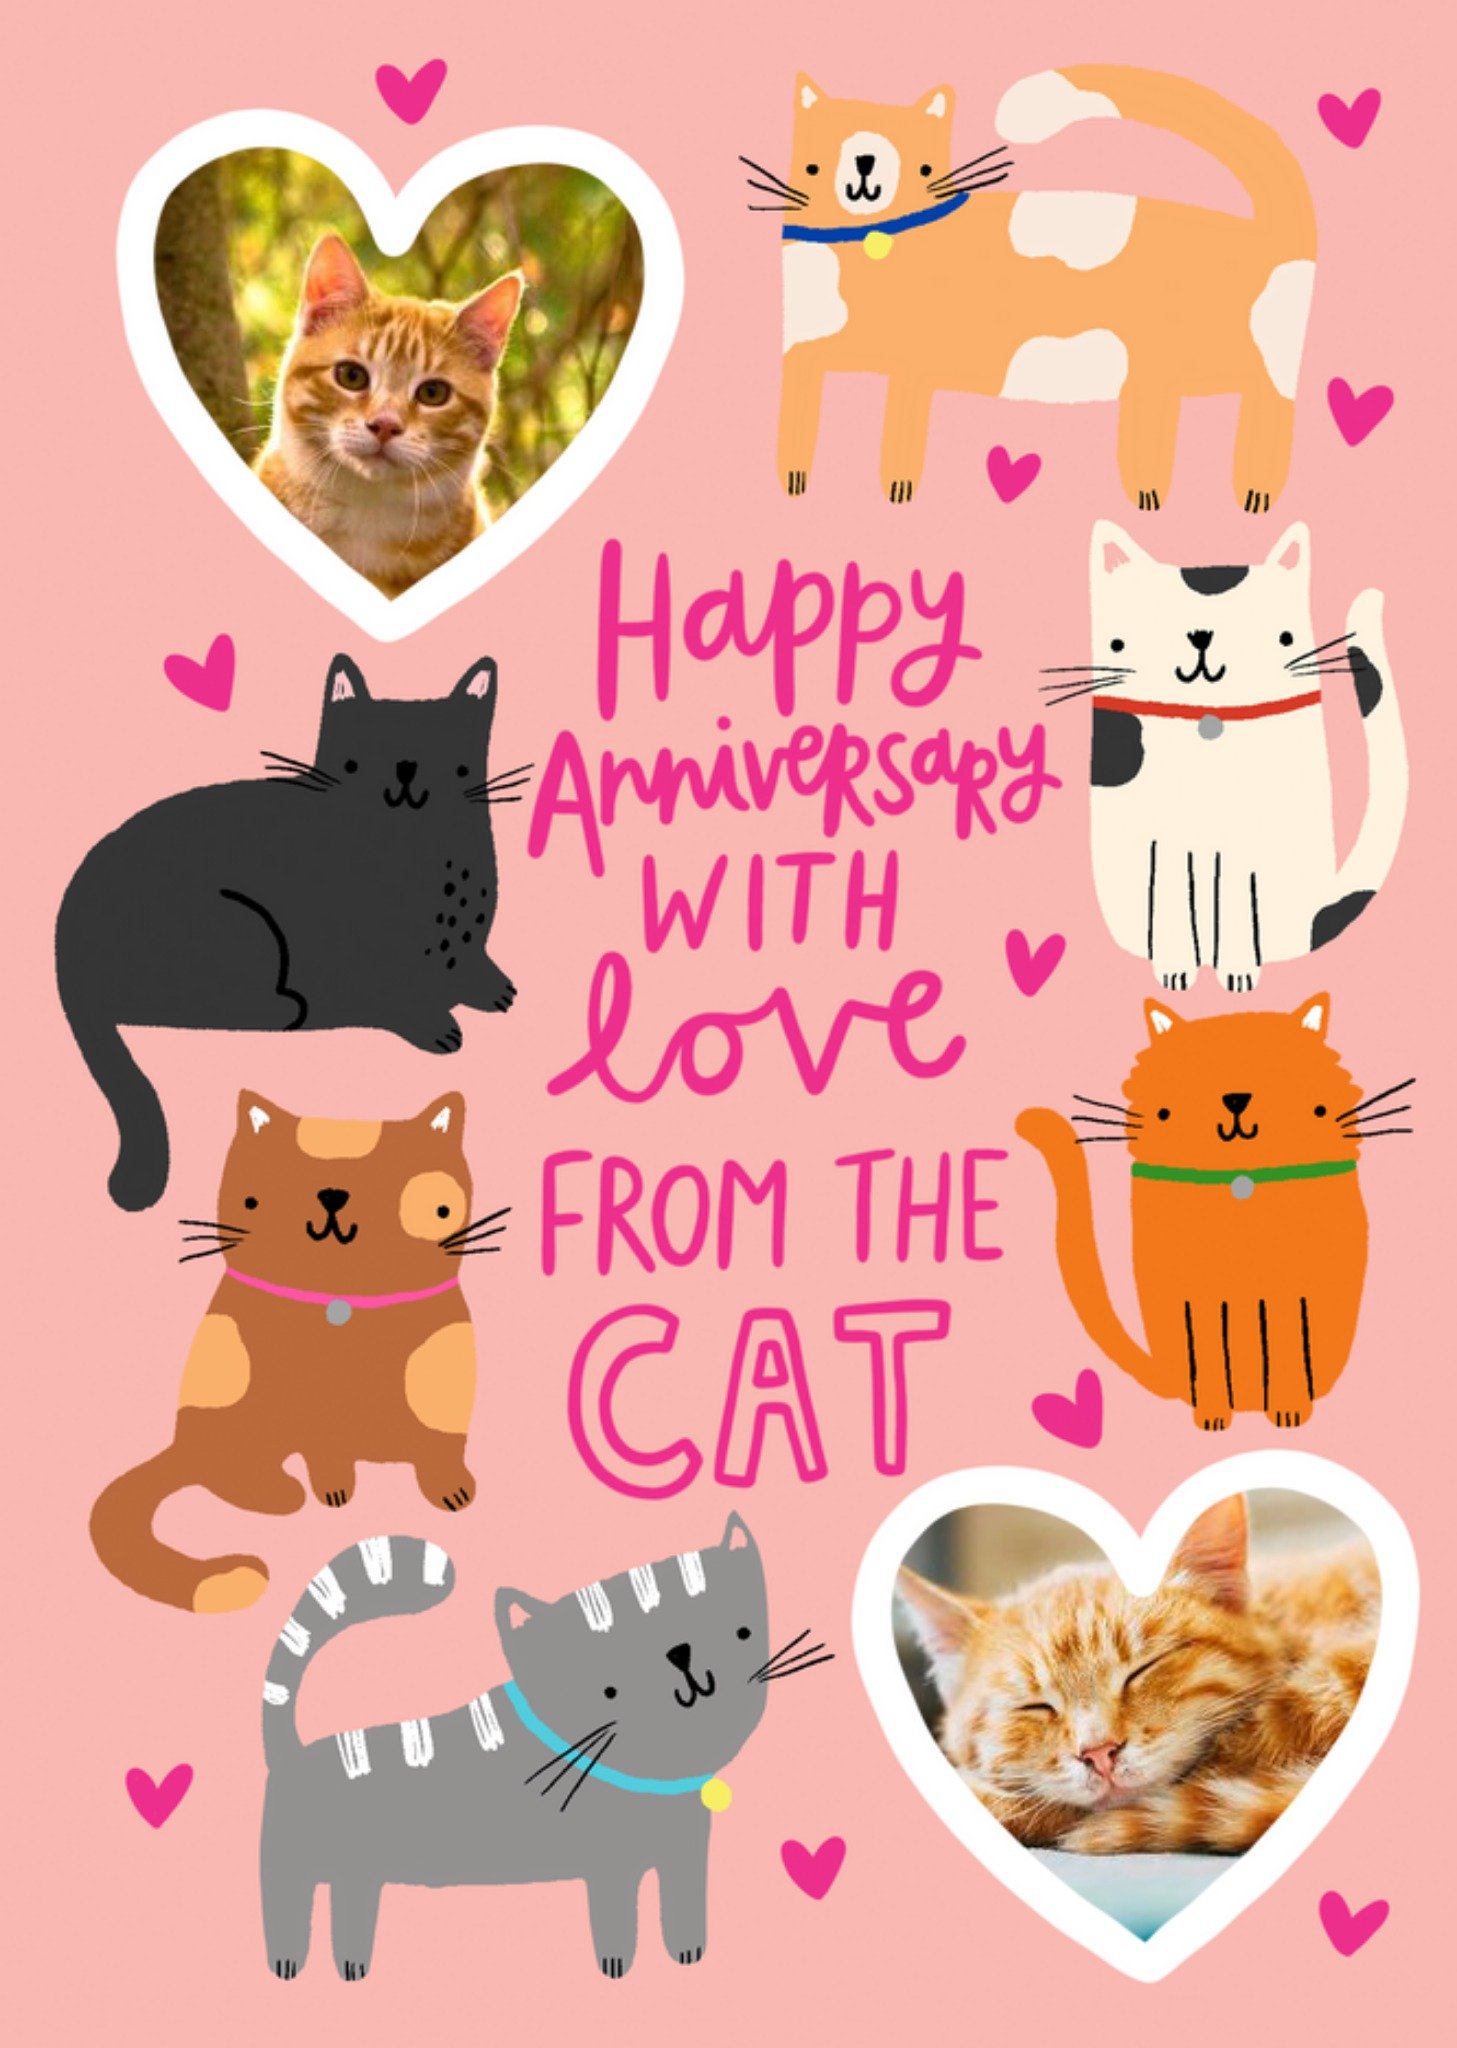 Moonpig Illustration Of Various Cats From The Cat Photo Upload Anniversary Card Ecard